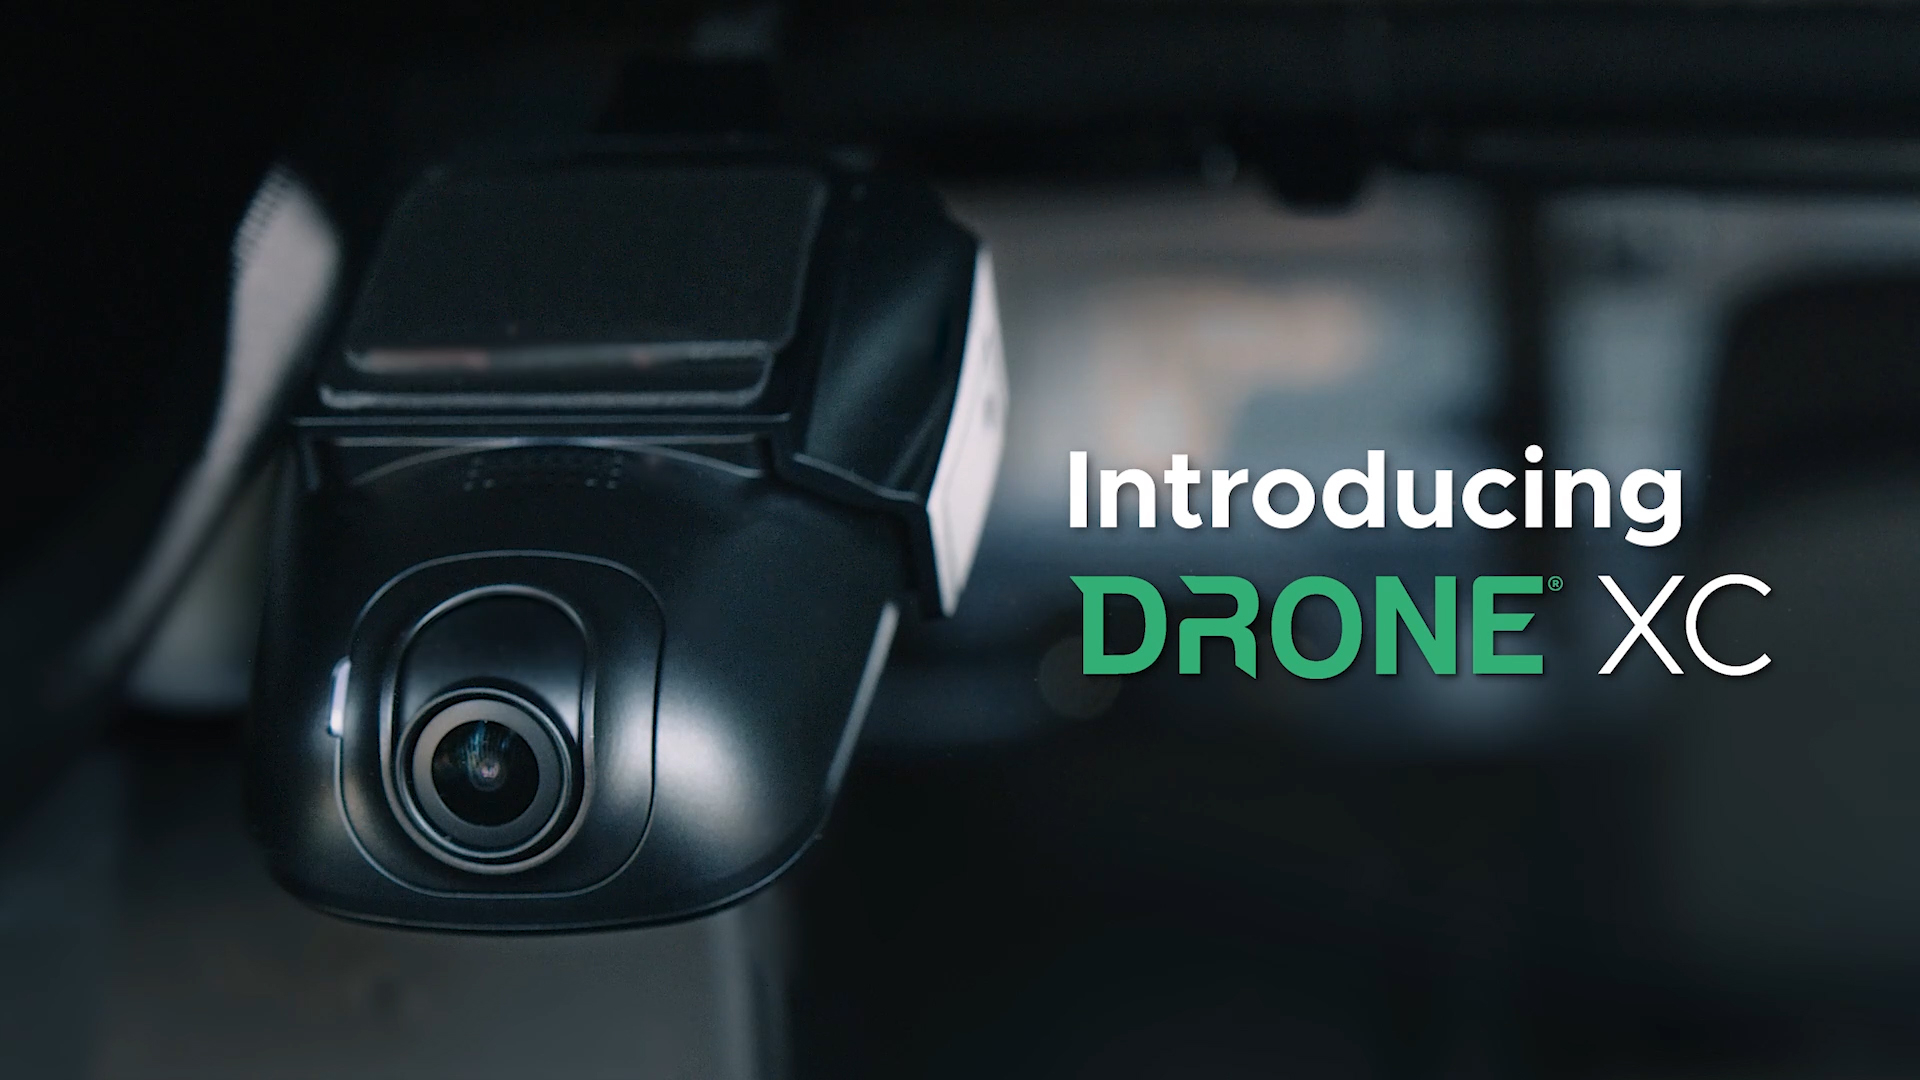 Introducing Drone XC dash camera, eyes on your ride like never before